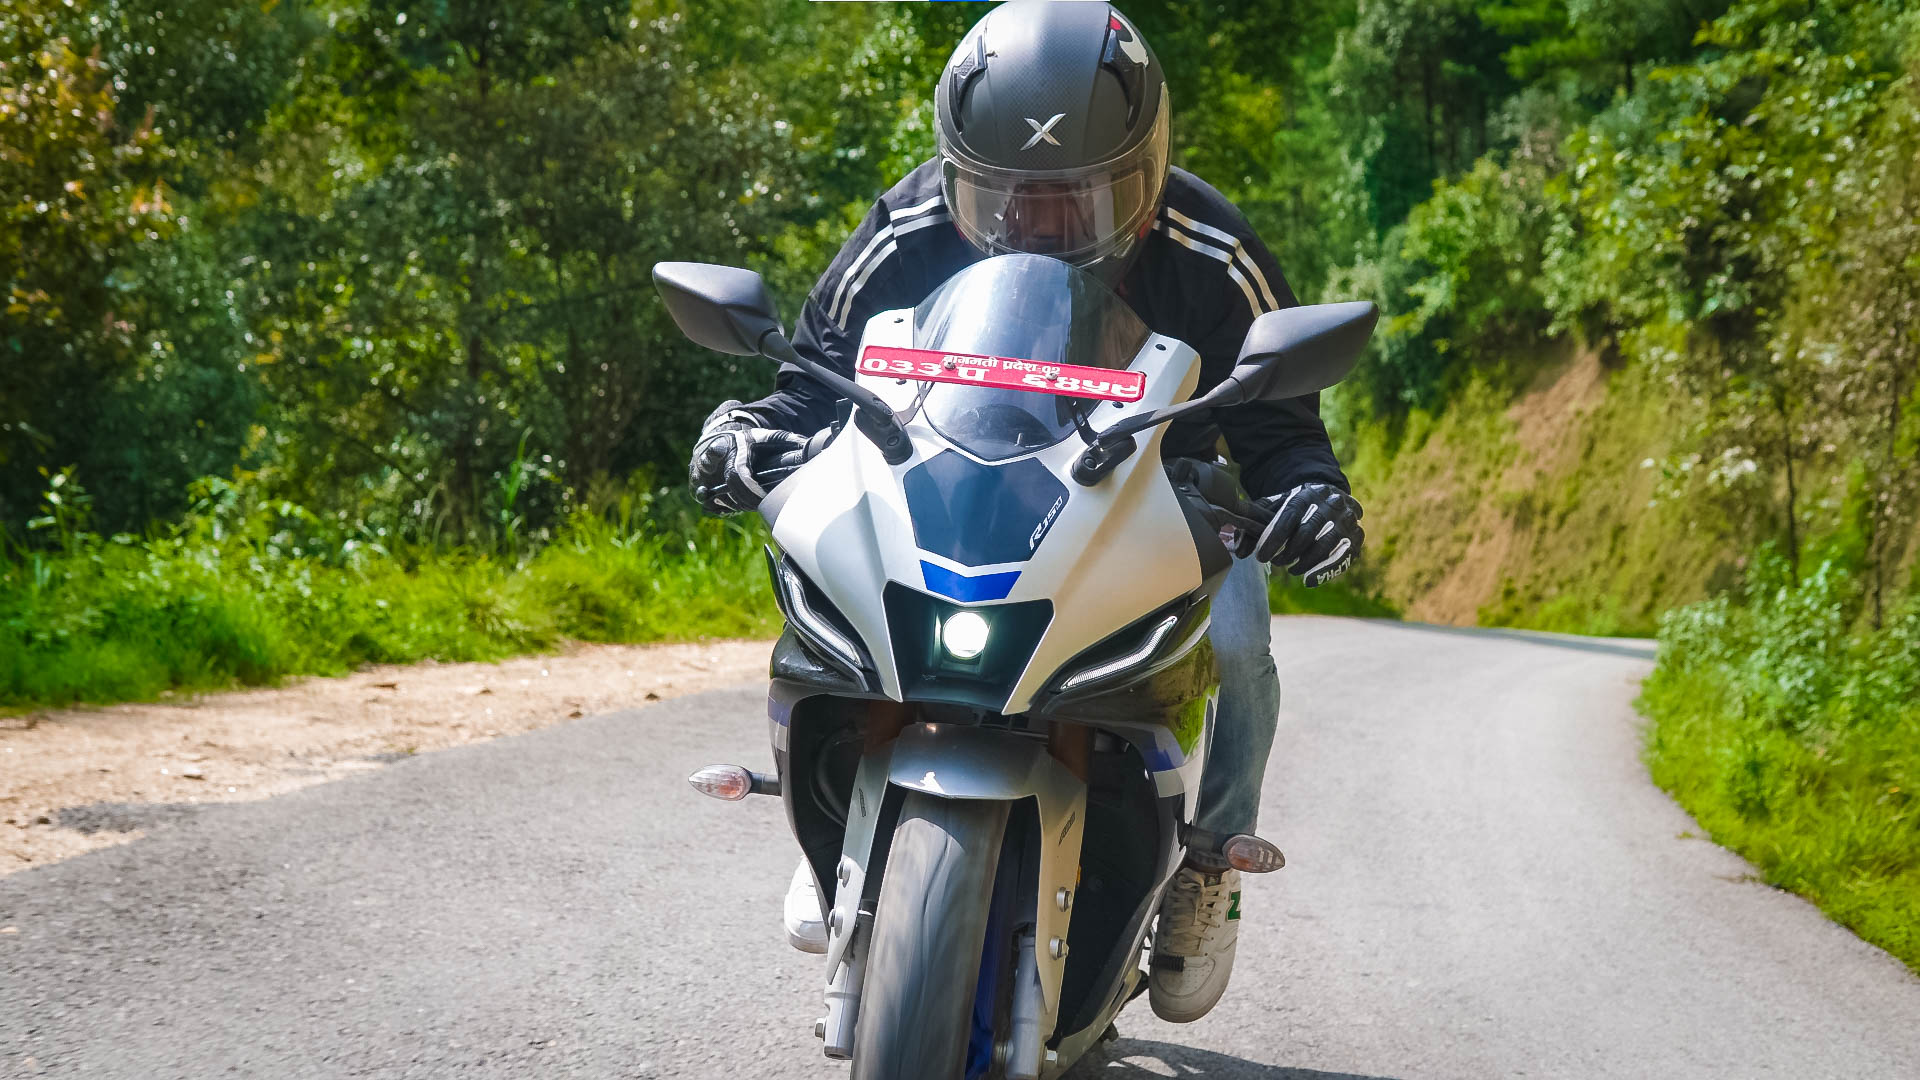 Front Styling in Yamaha R15M